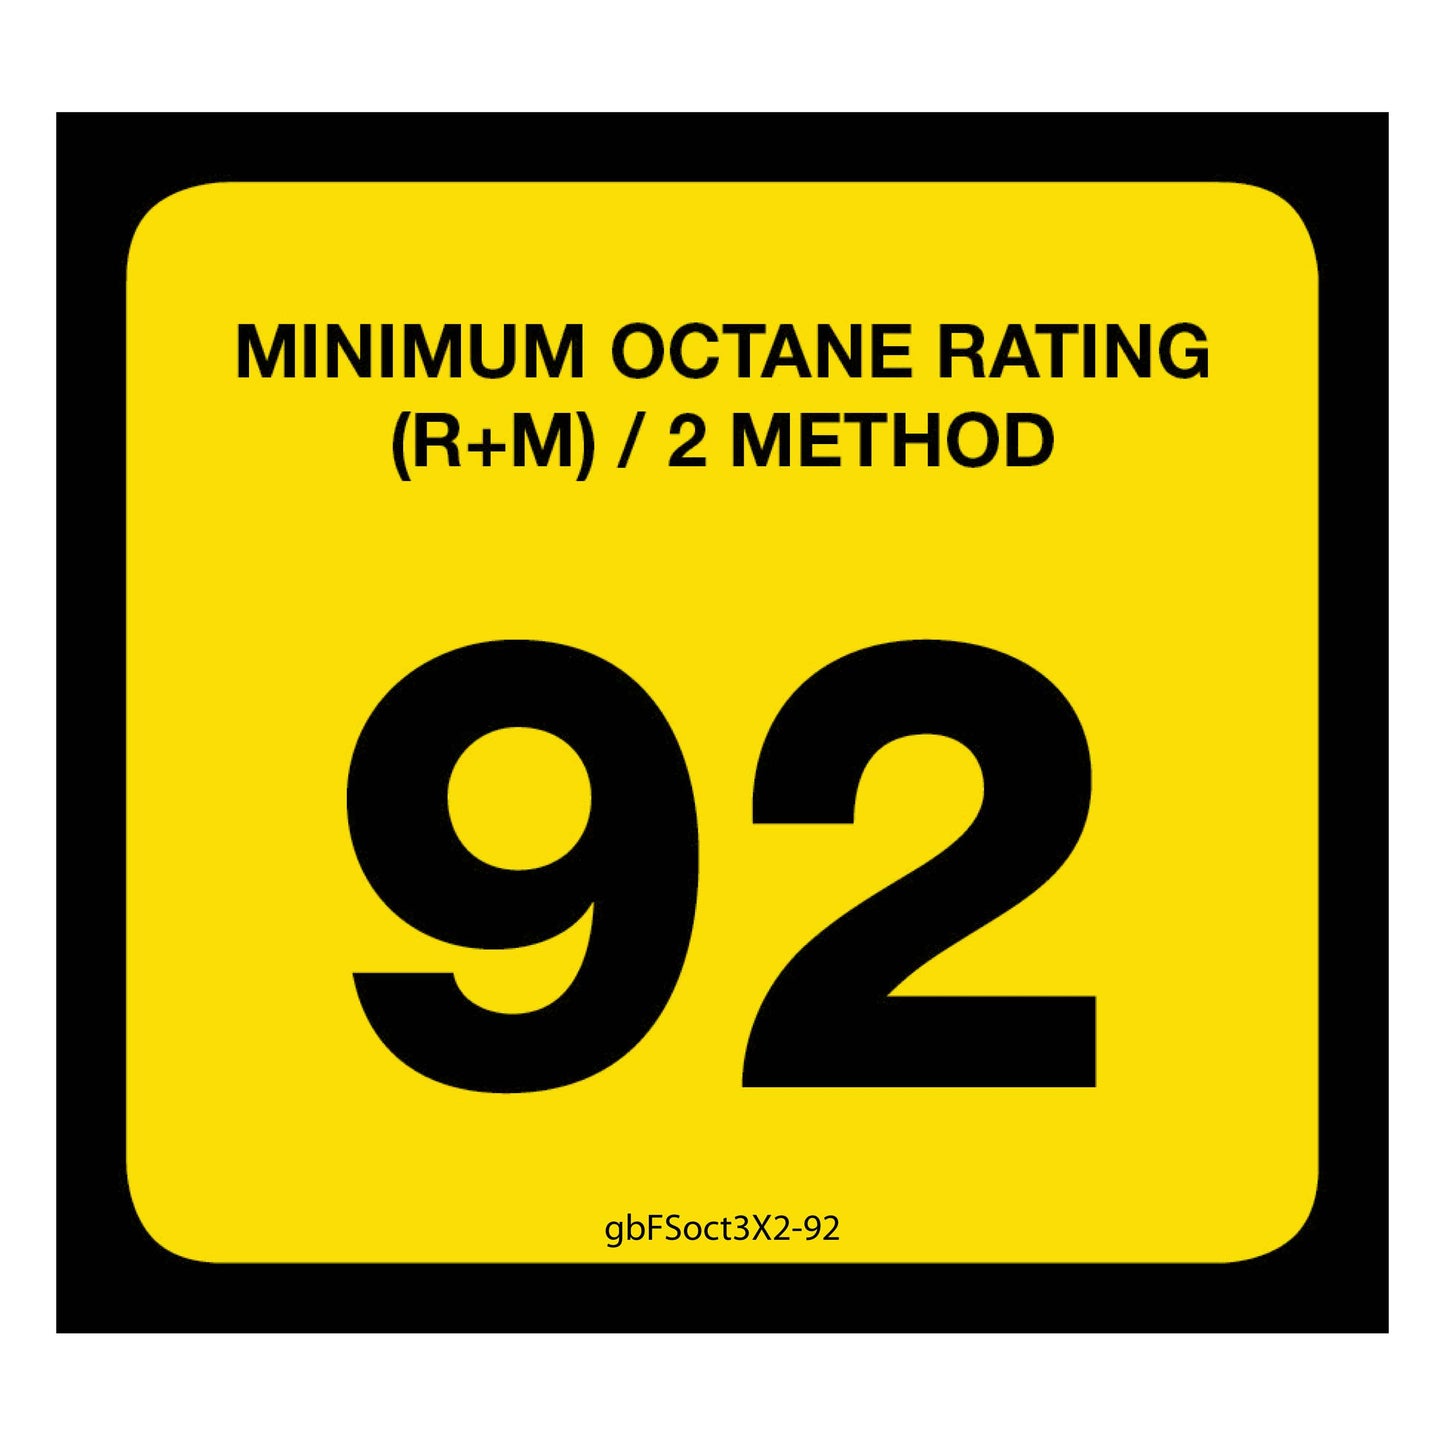 92 Octane Rating Decal. 3 inches by 2 inches in size. 